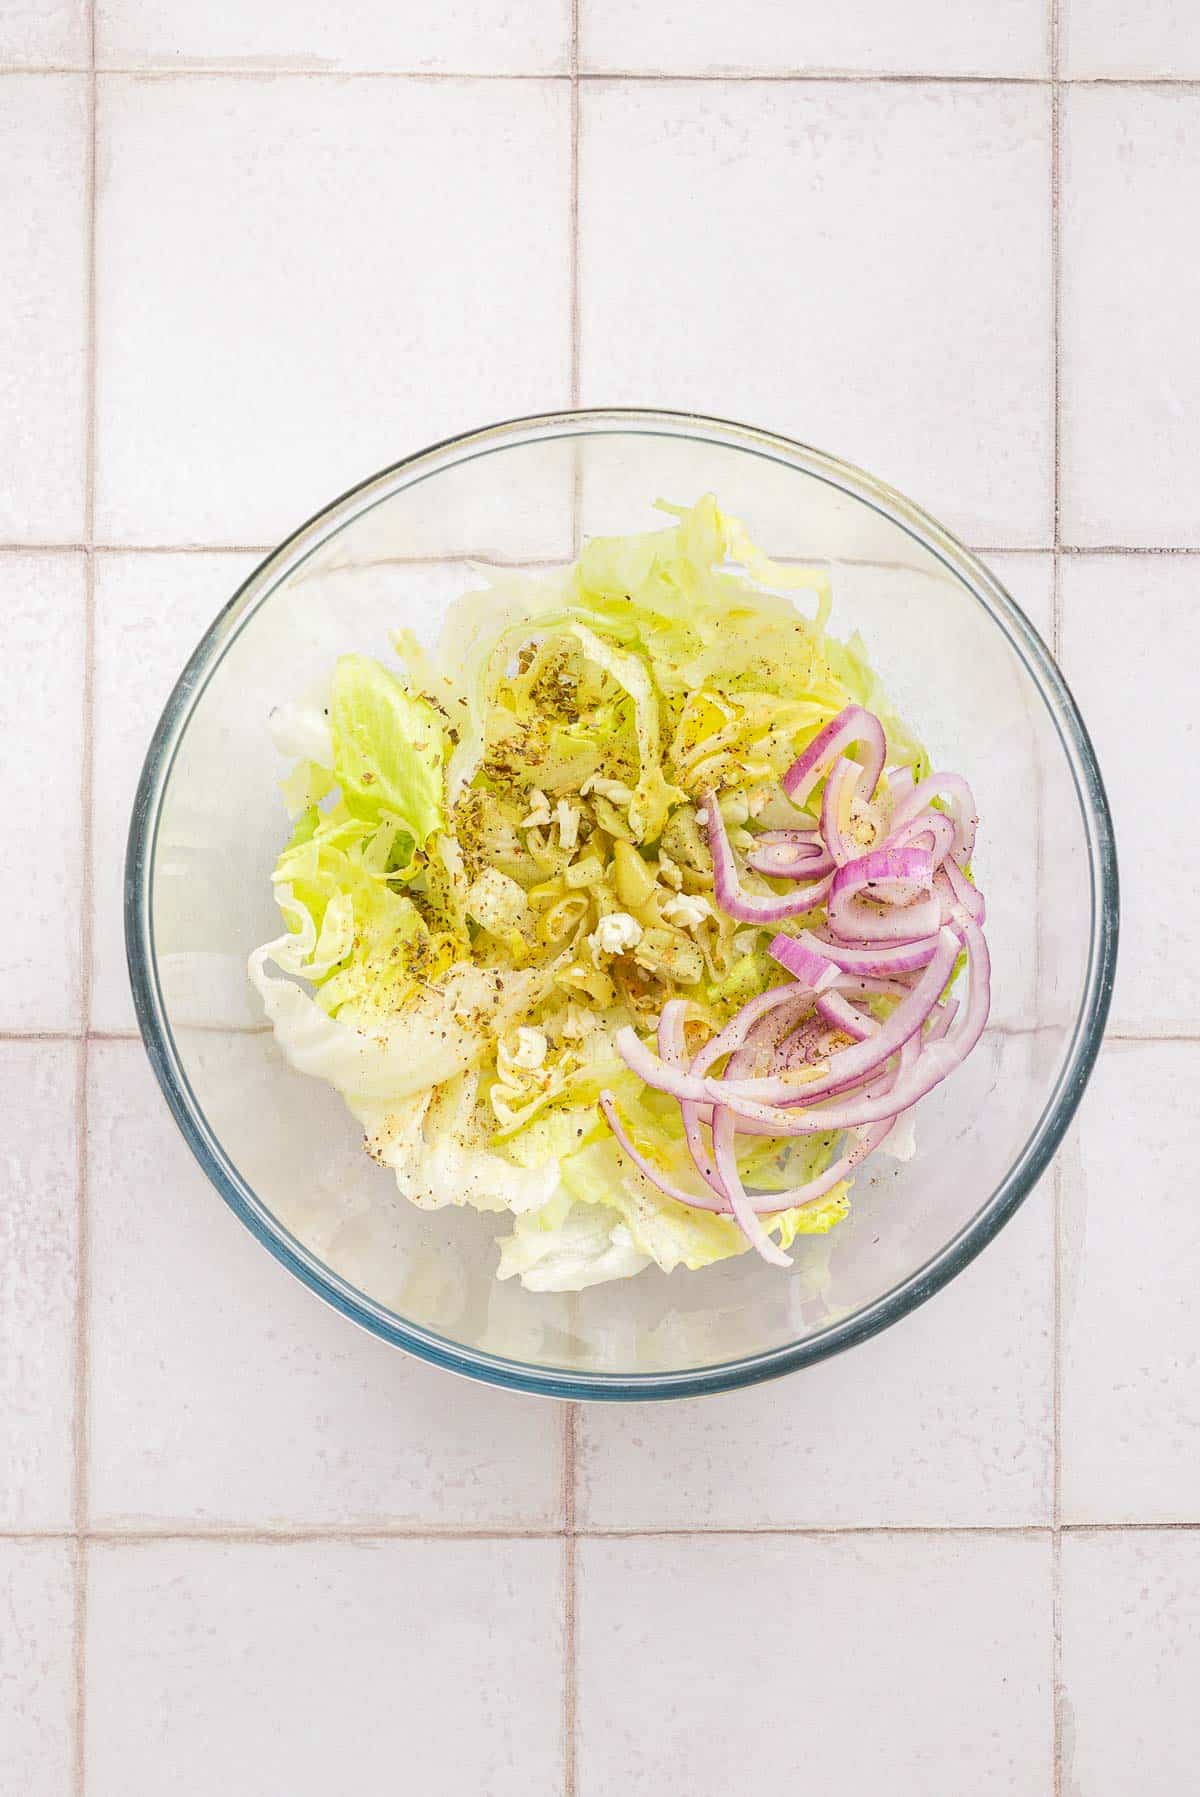 A bowl of salad with onions and spices.